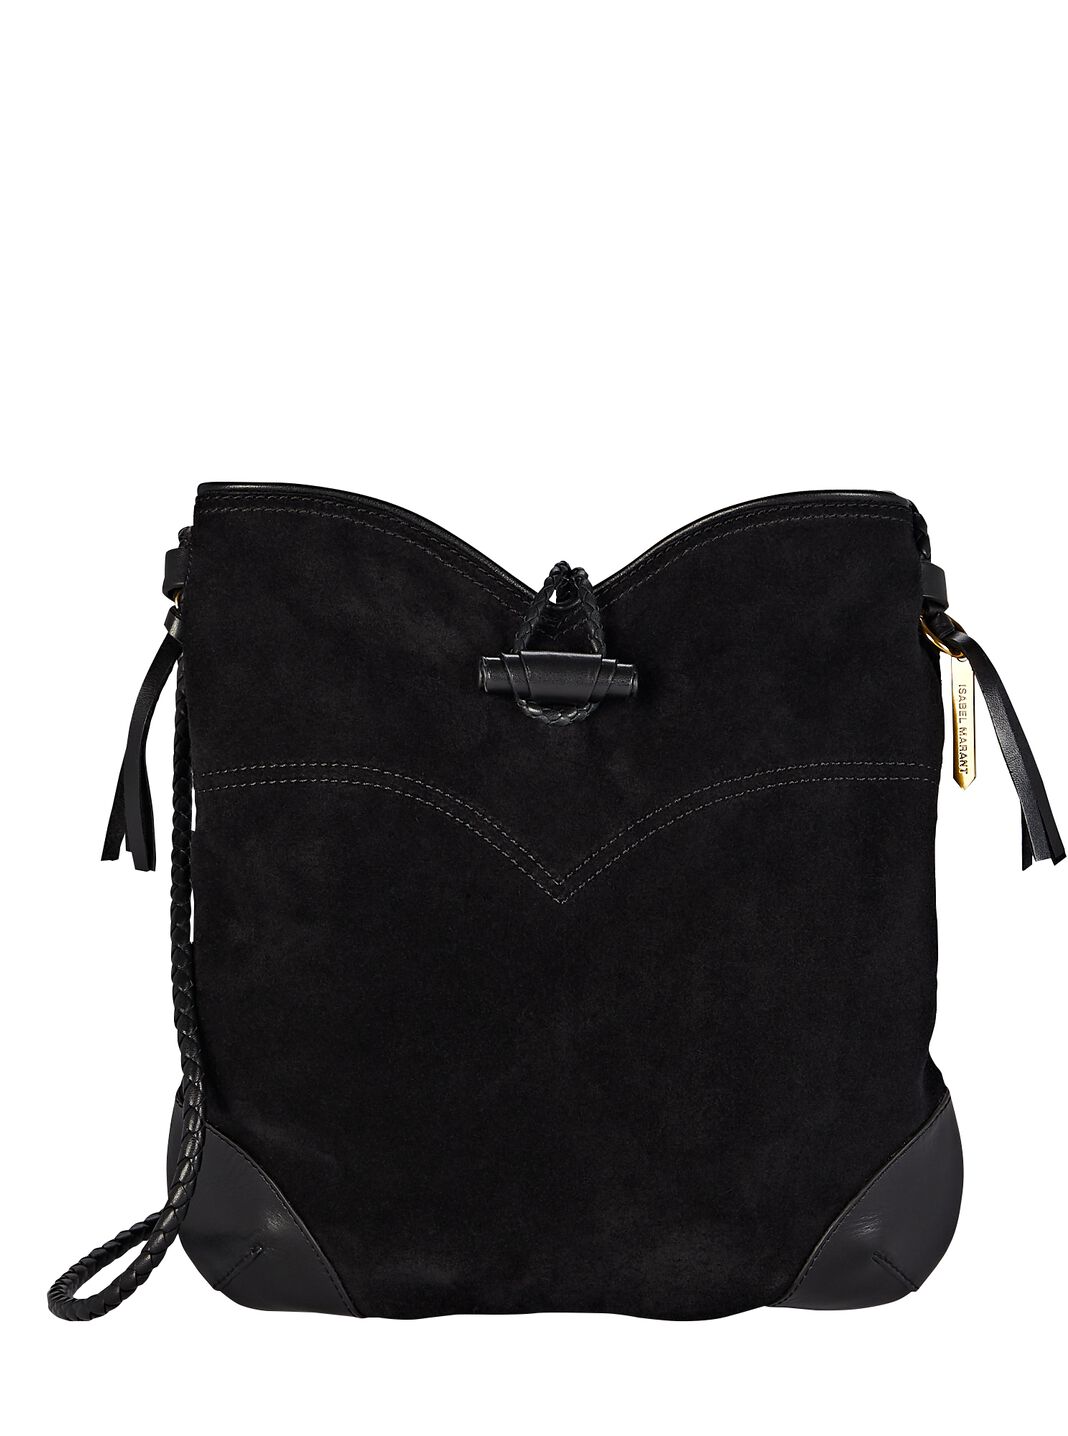 Tyag Slouchy Suede Messenger Bag